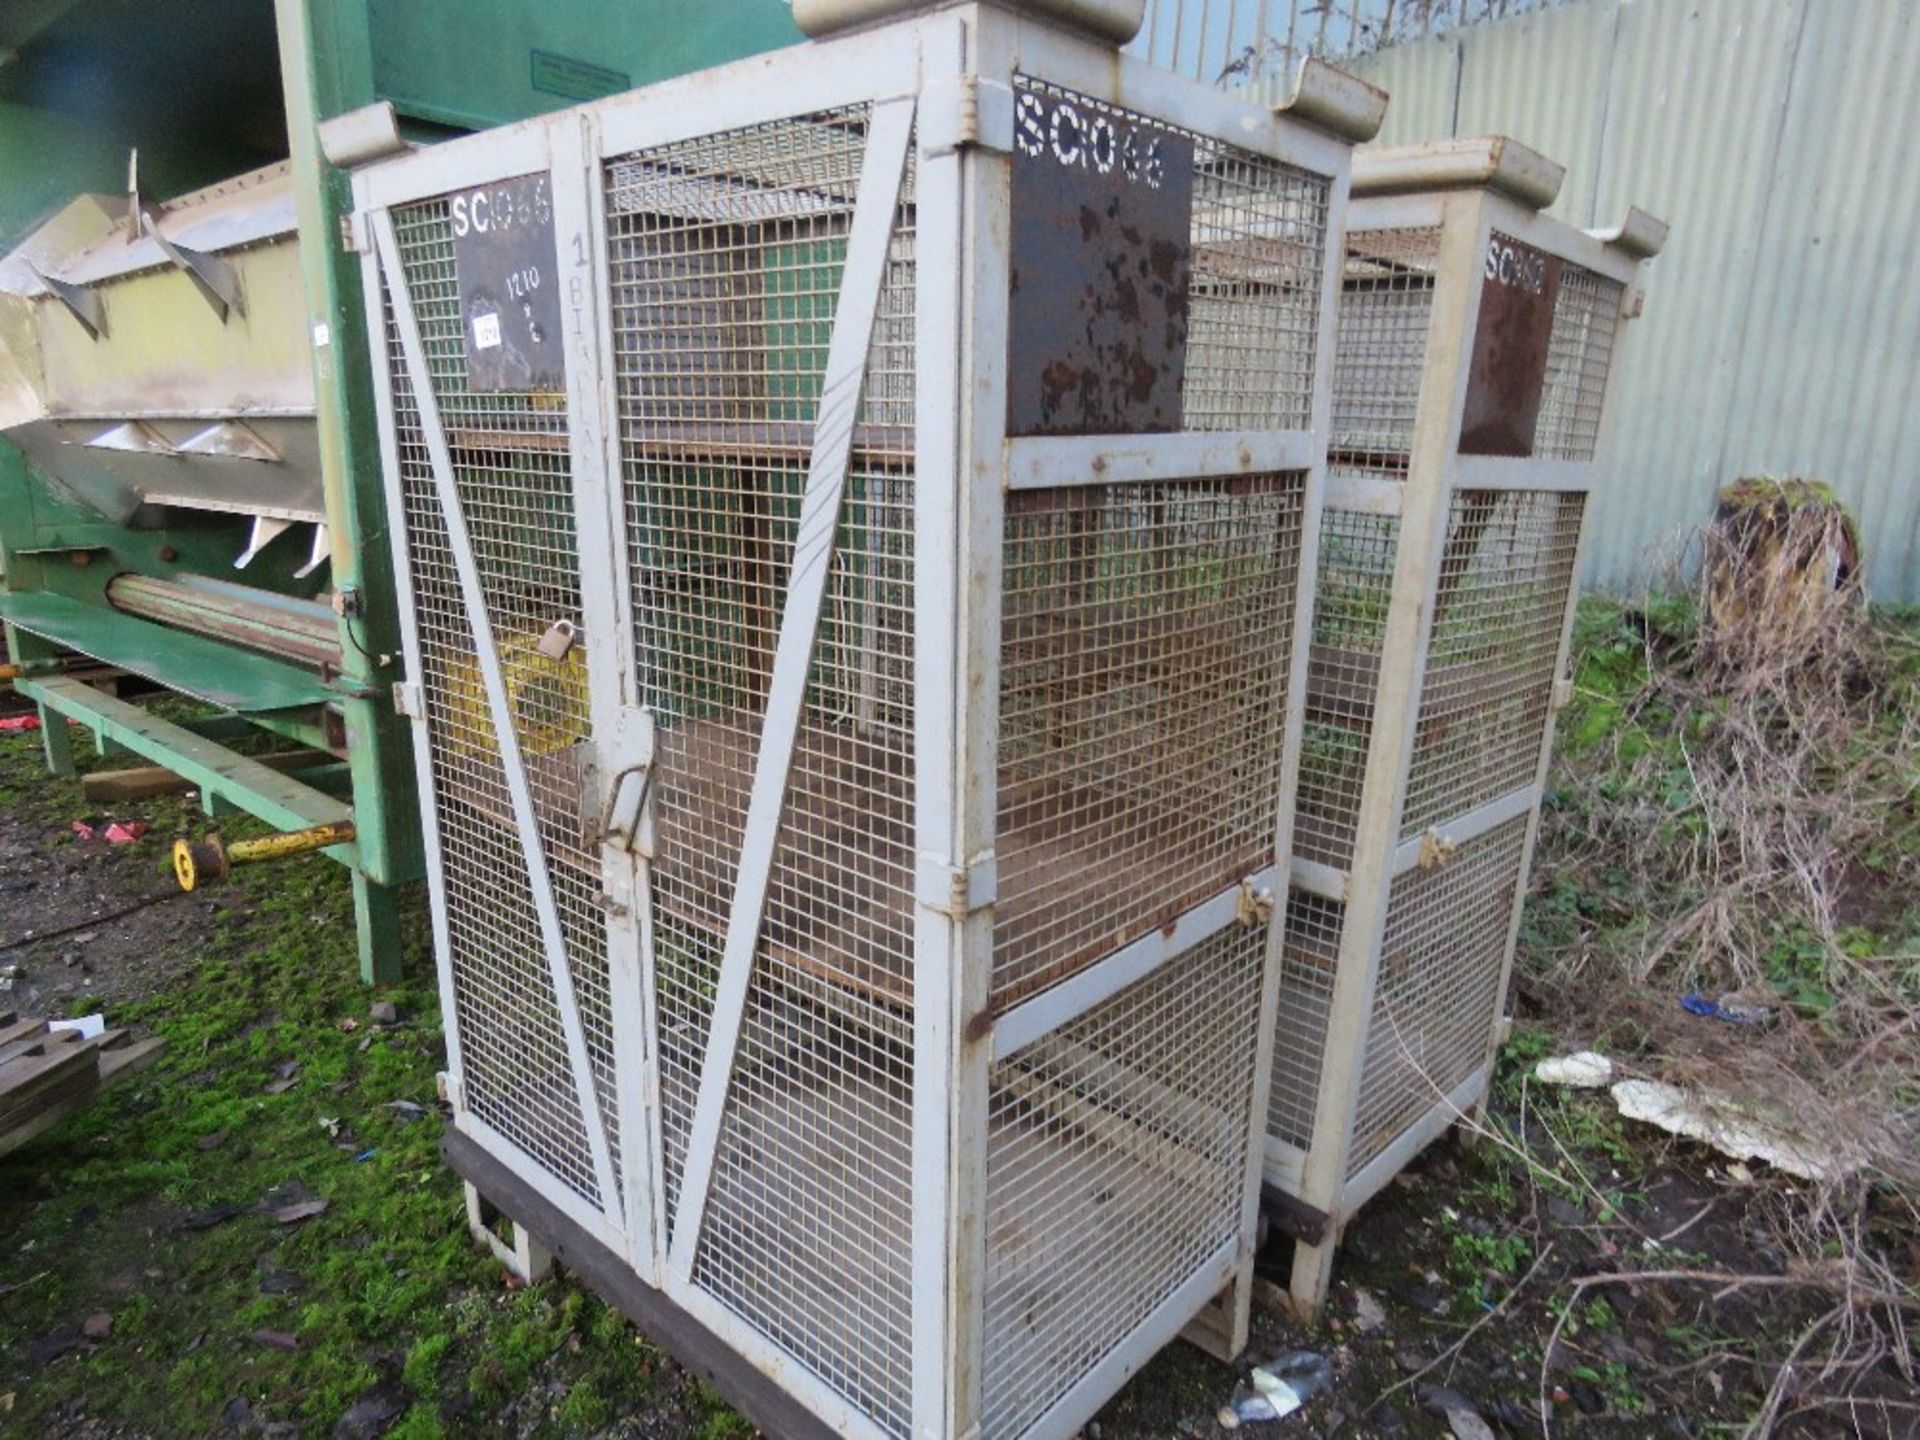 2 X HEAVY DUTY MESH COVERED LOCKABLE STORAGE CAGES.